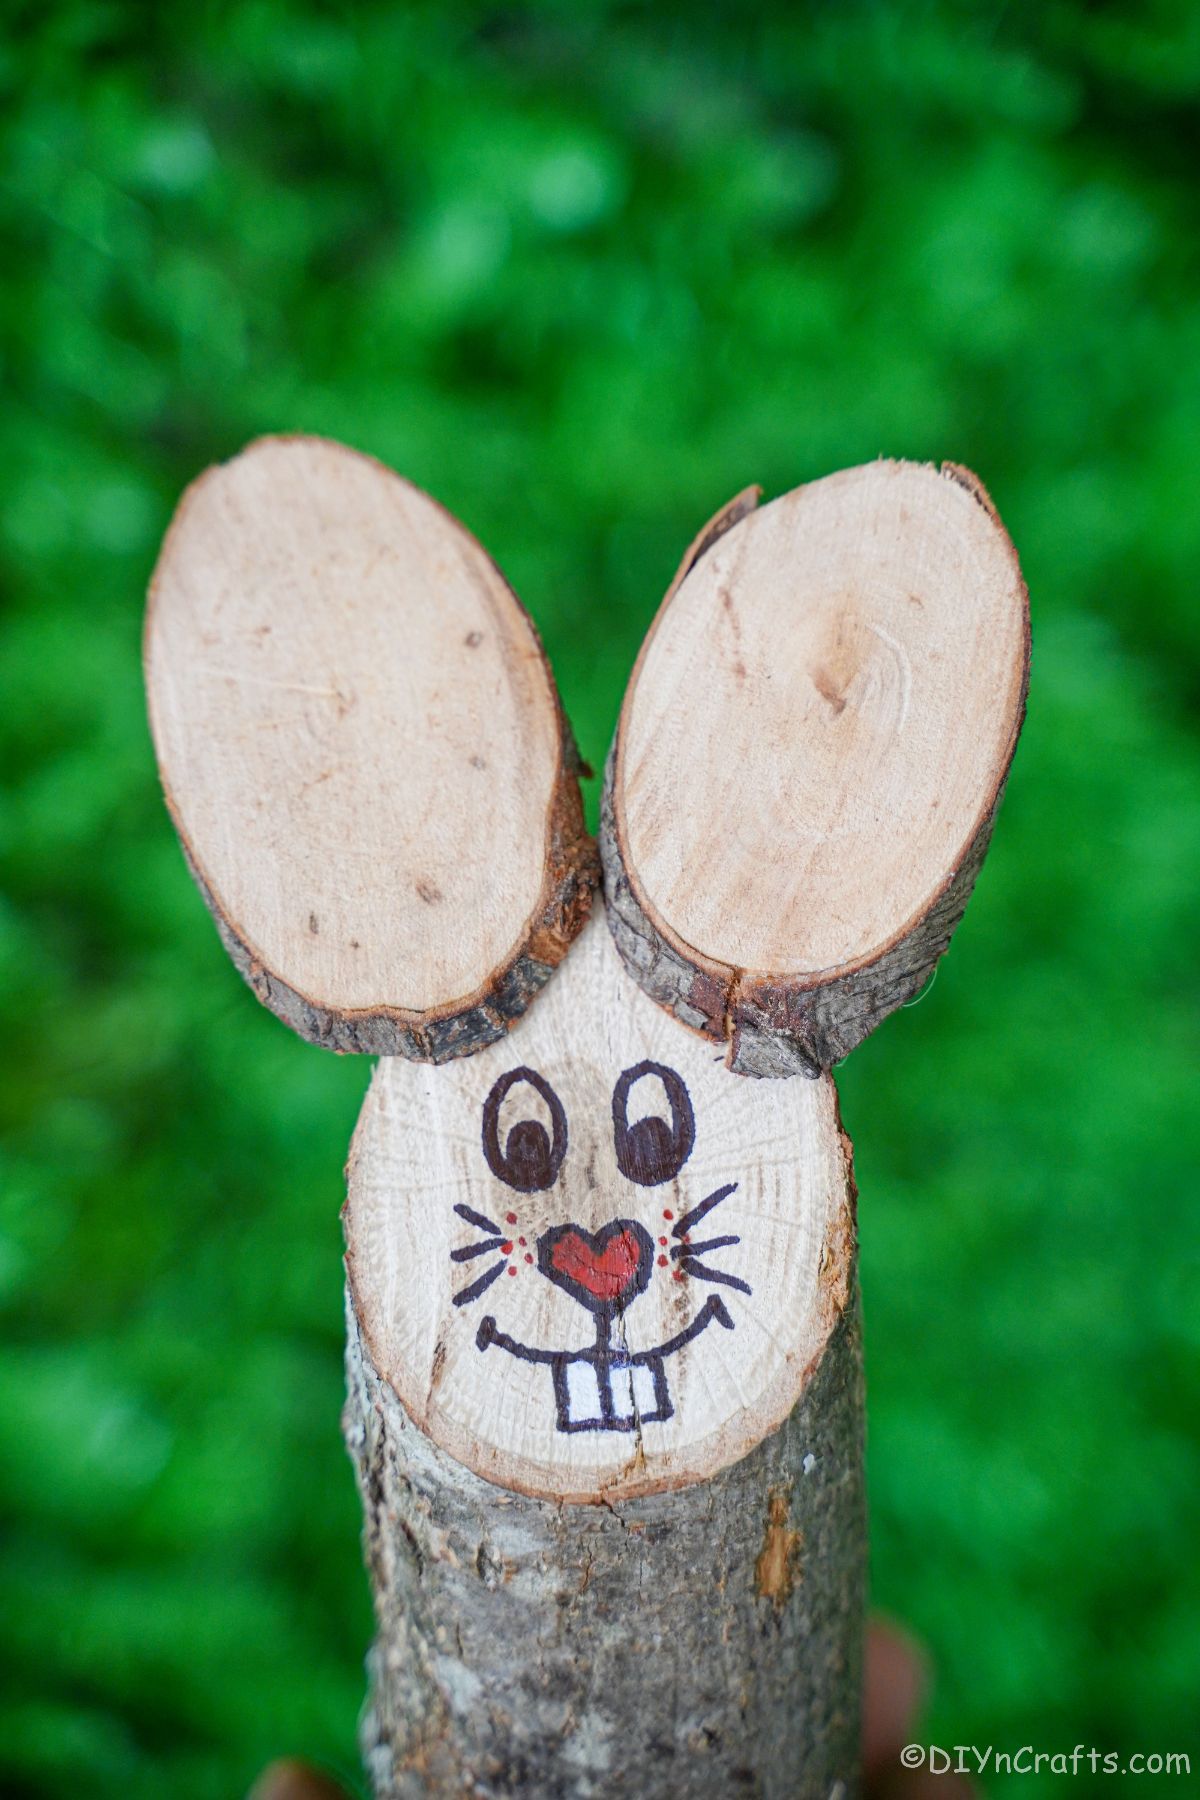 log with wood slice ears and bunny face against grass background